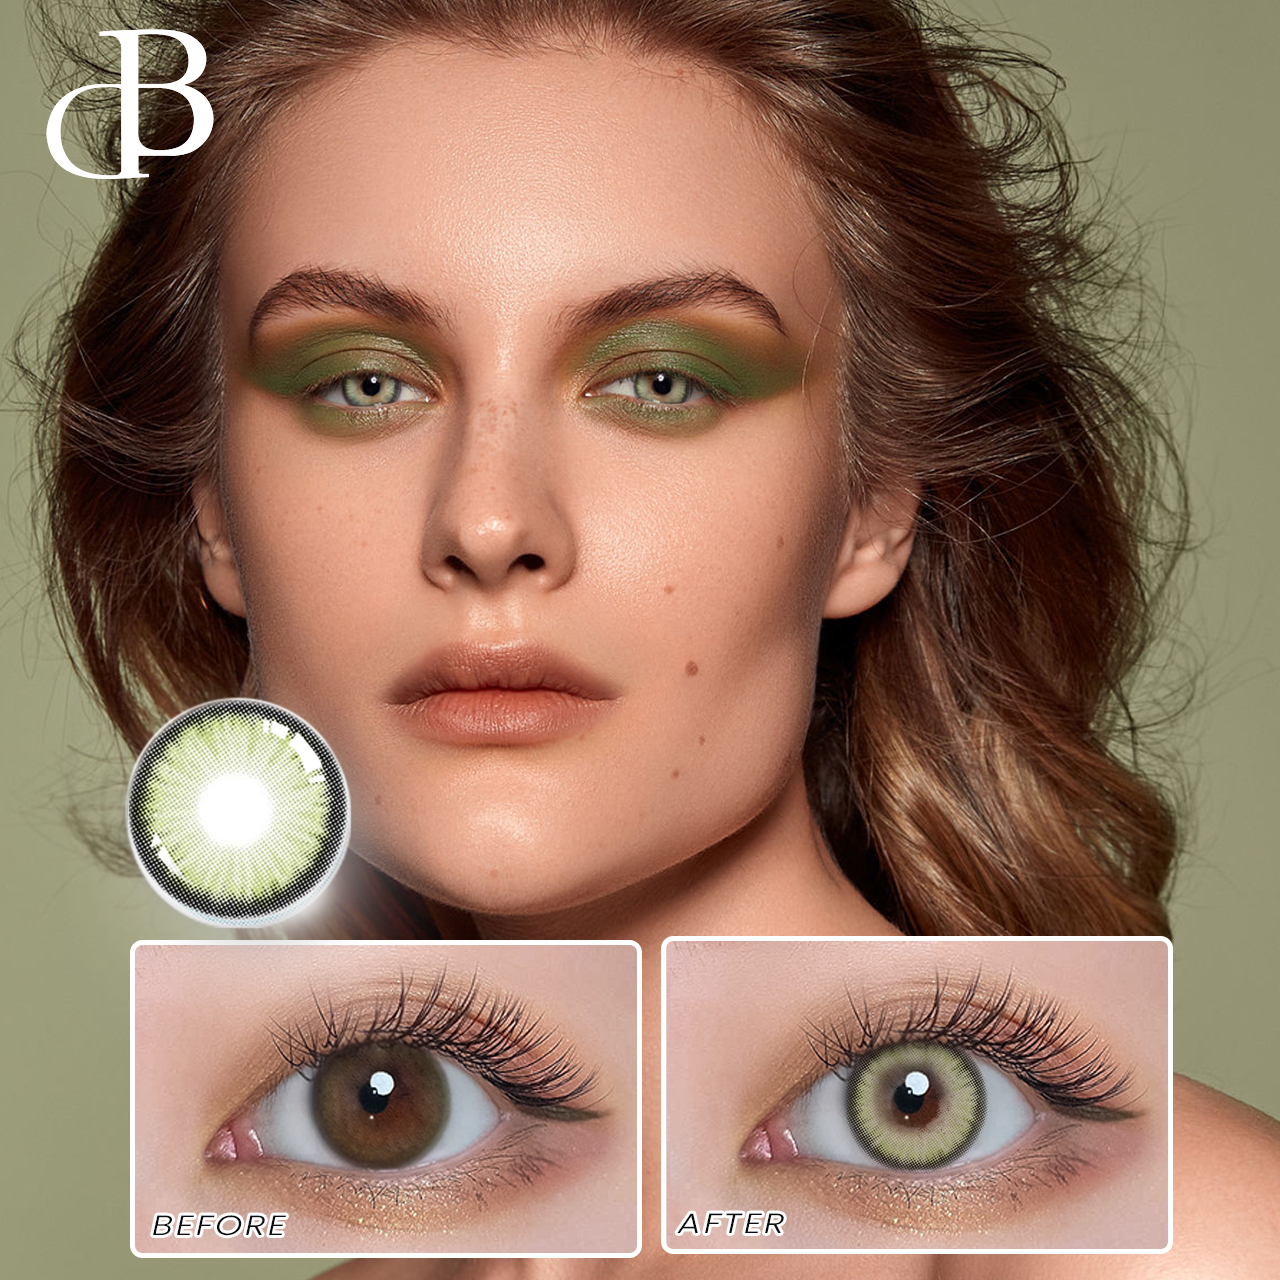 DBeyes Daily colored contact lenses good quality koran material hare